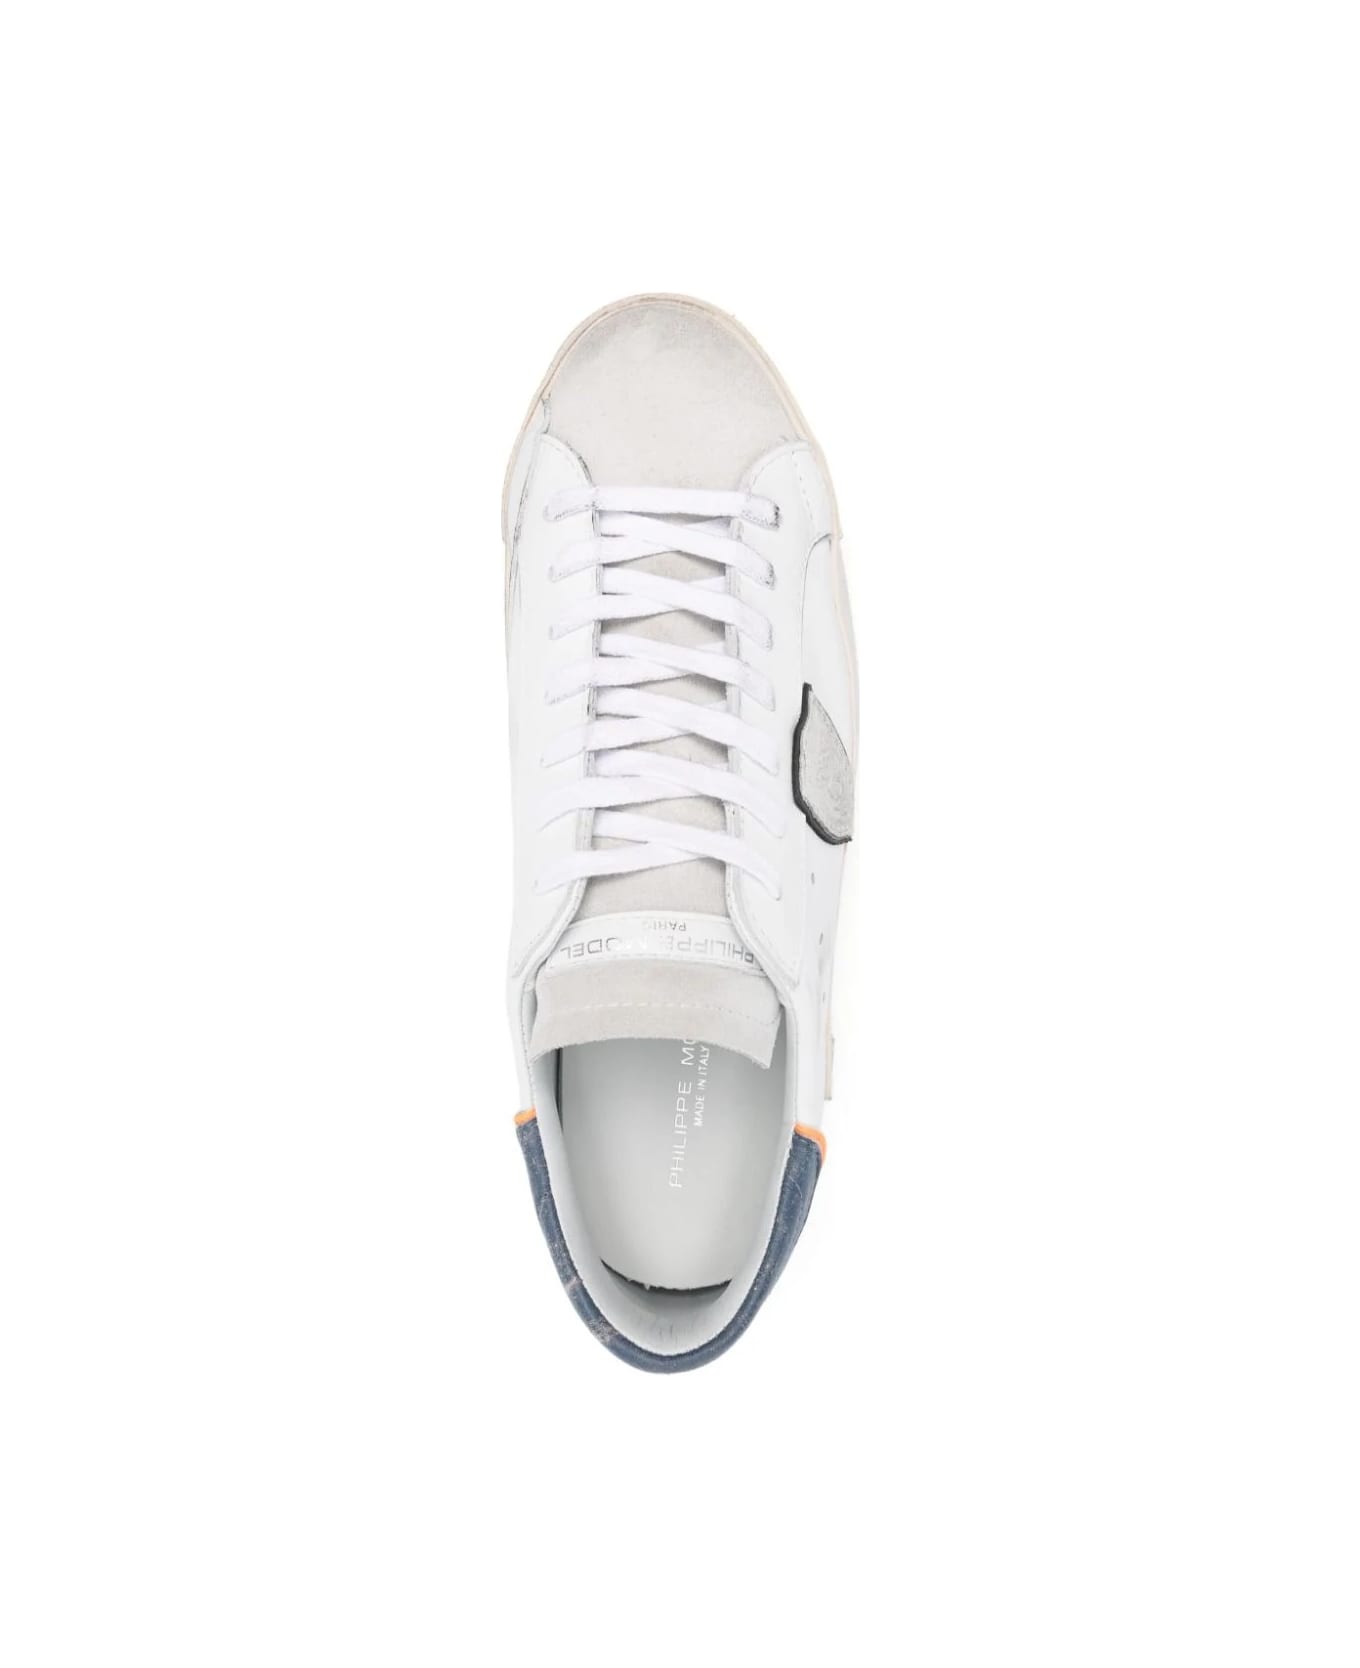 Philippe Model Prsx Low Sneakers - White, Blue And Orange - White